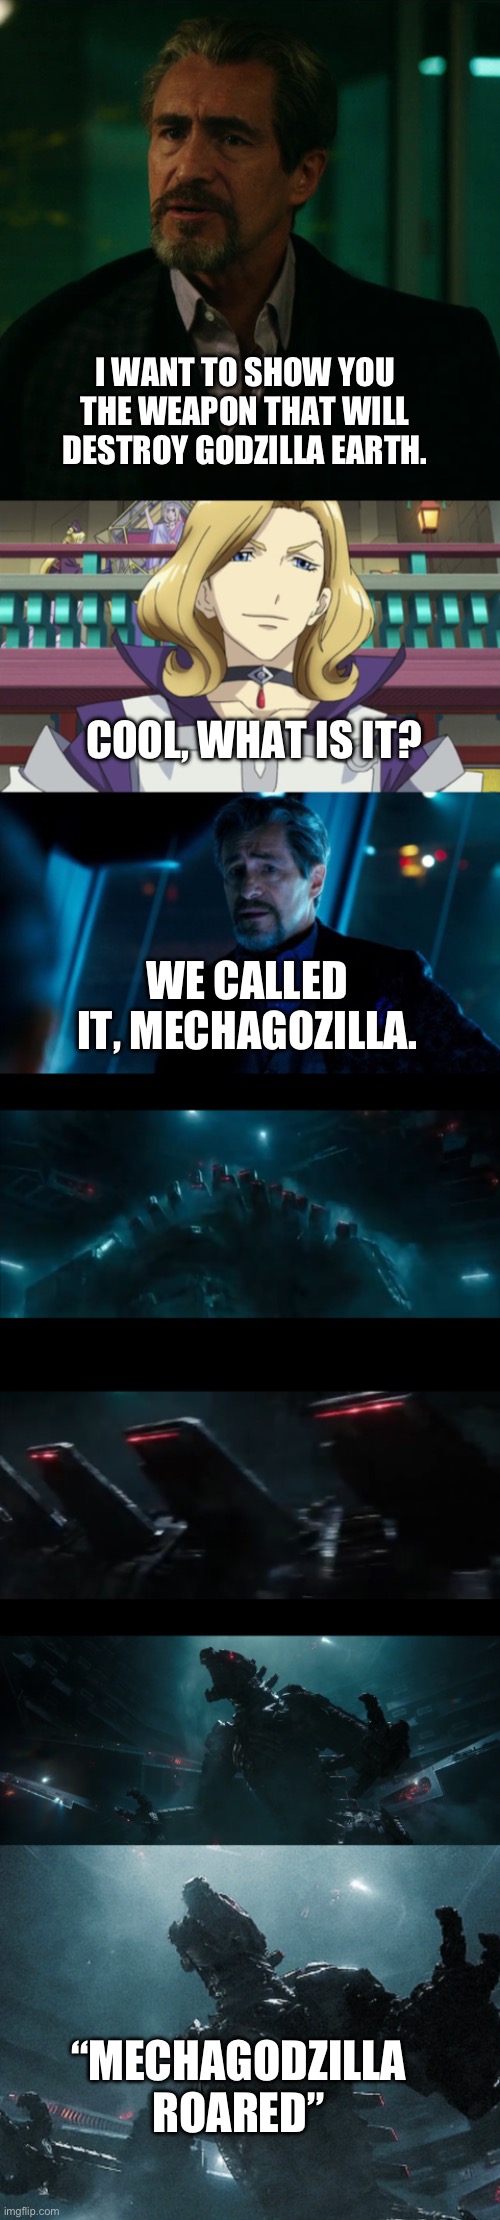 Walter shows Julio Mechagodzilla | I WANT TO SHOW YOU THE WEAPON THAT WILL DESTROY GODZILLA EARTH. COOL, WHAT IS IT? WE CALLED IT, MECHAGOZILLA. “MECHAGODZILLA ROARED” | image tagged in crossover | made w/ Imgflip meme maker